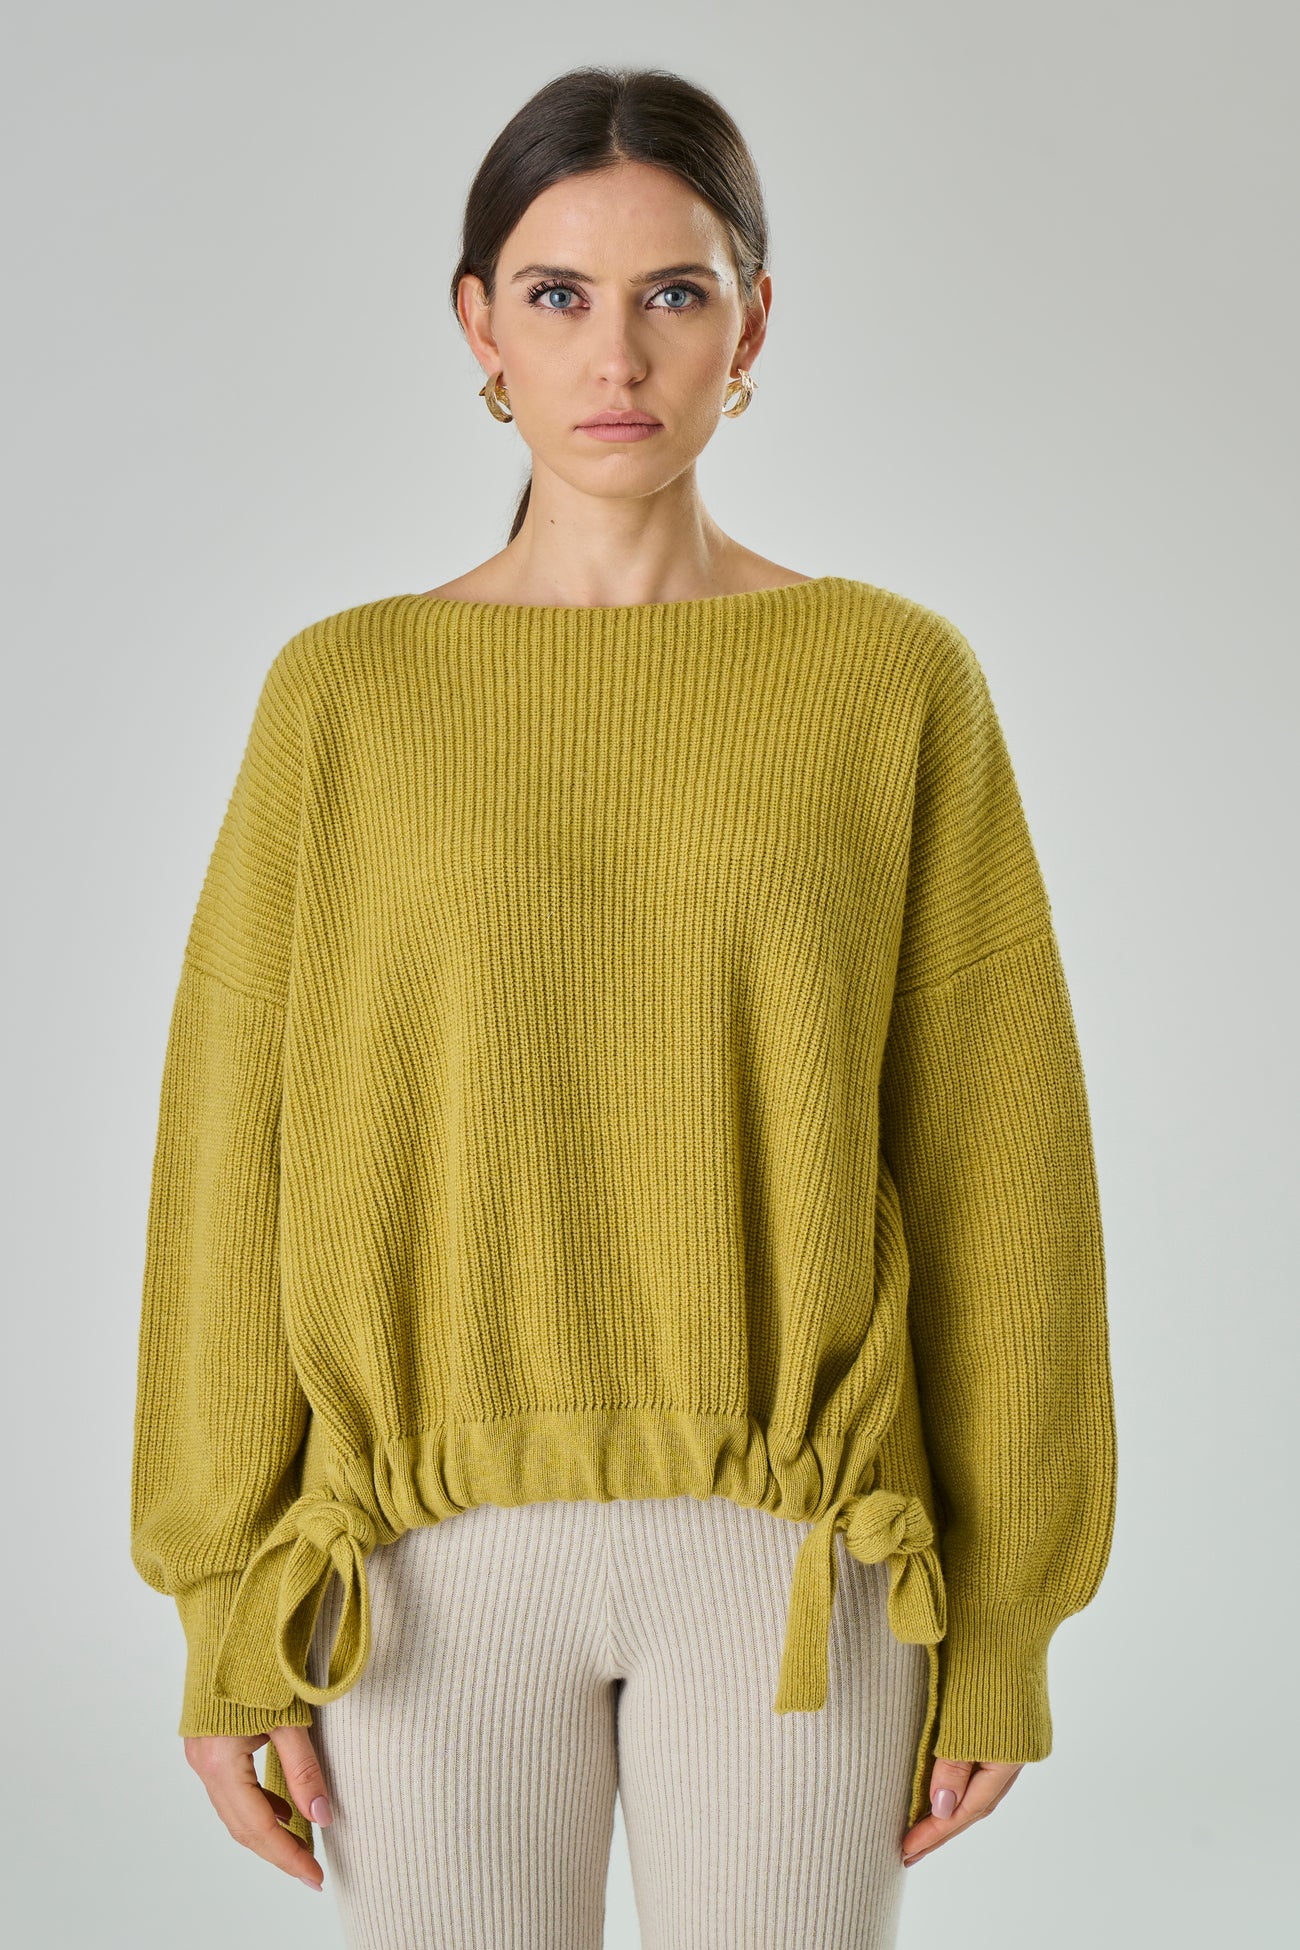 Sweater with detail on the front - Annalou 